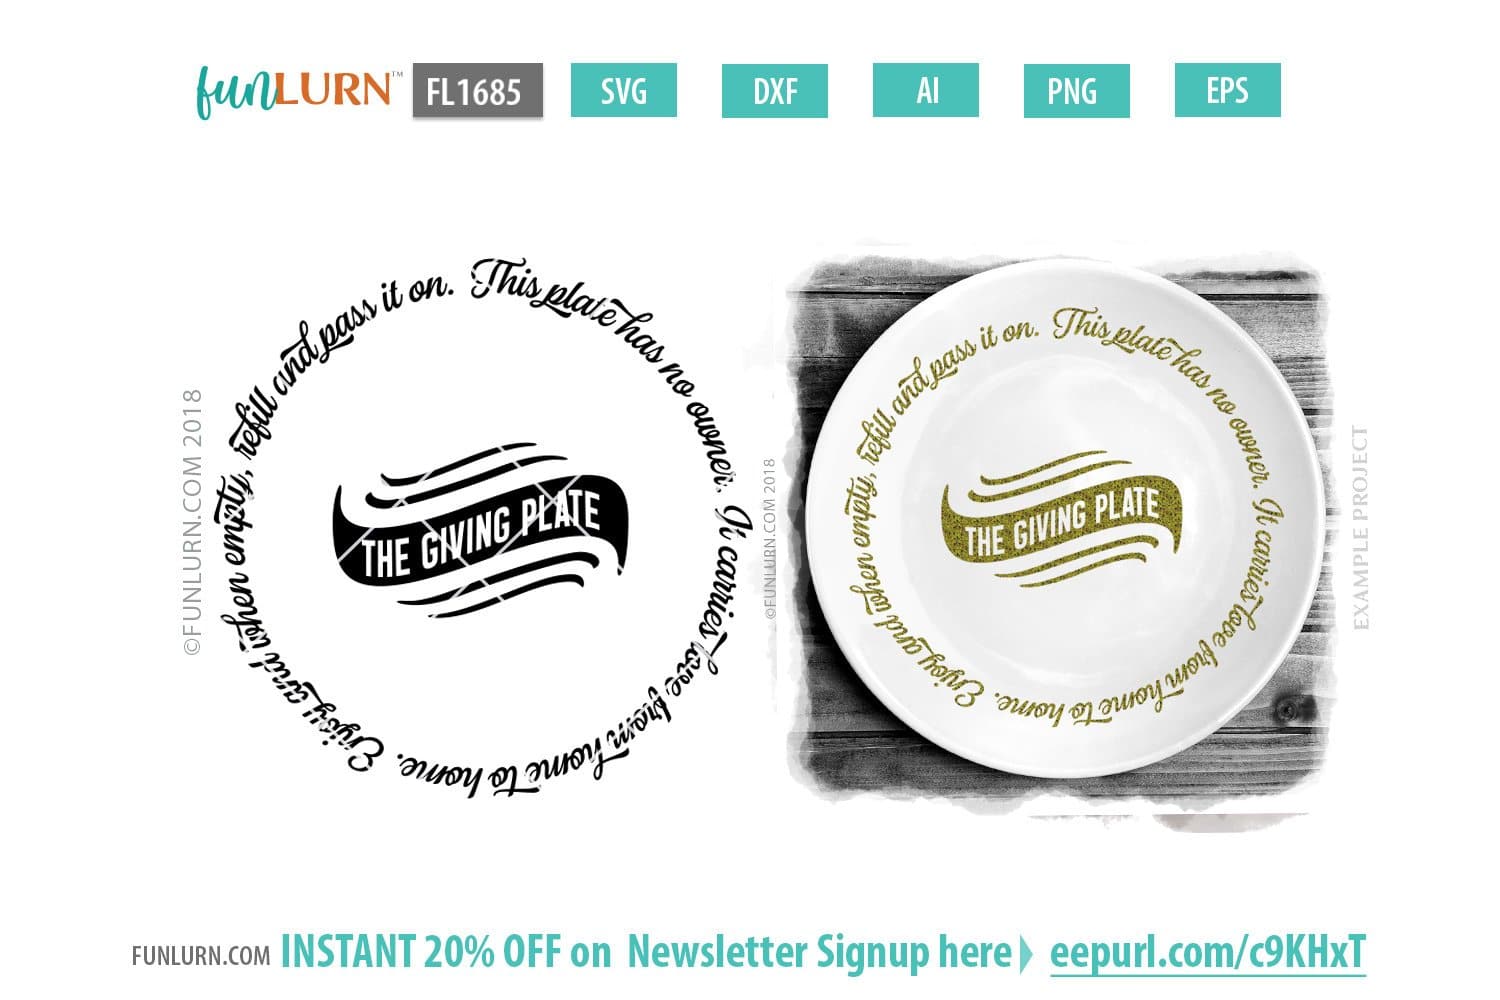 Download The Giving Plate Svg Circular Design Funlurn